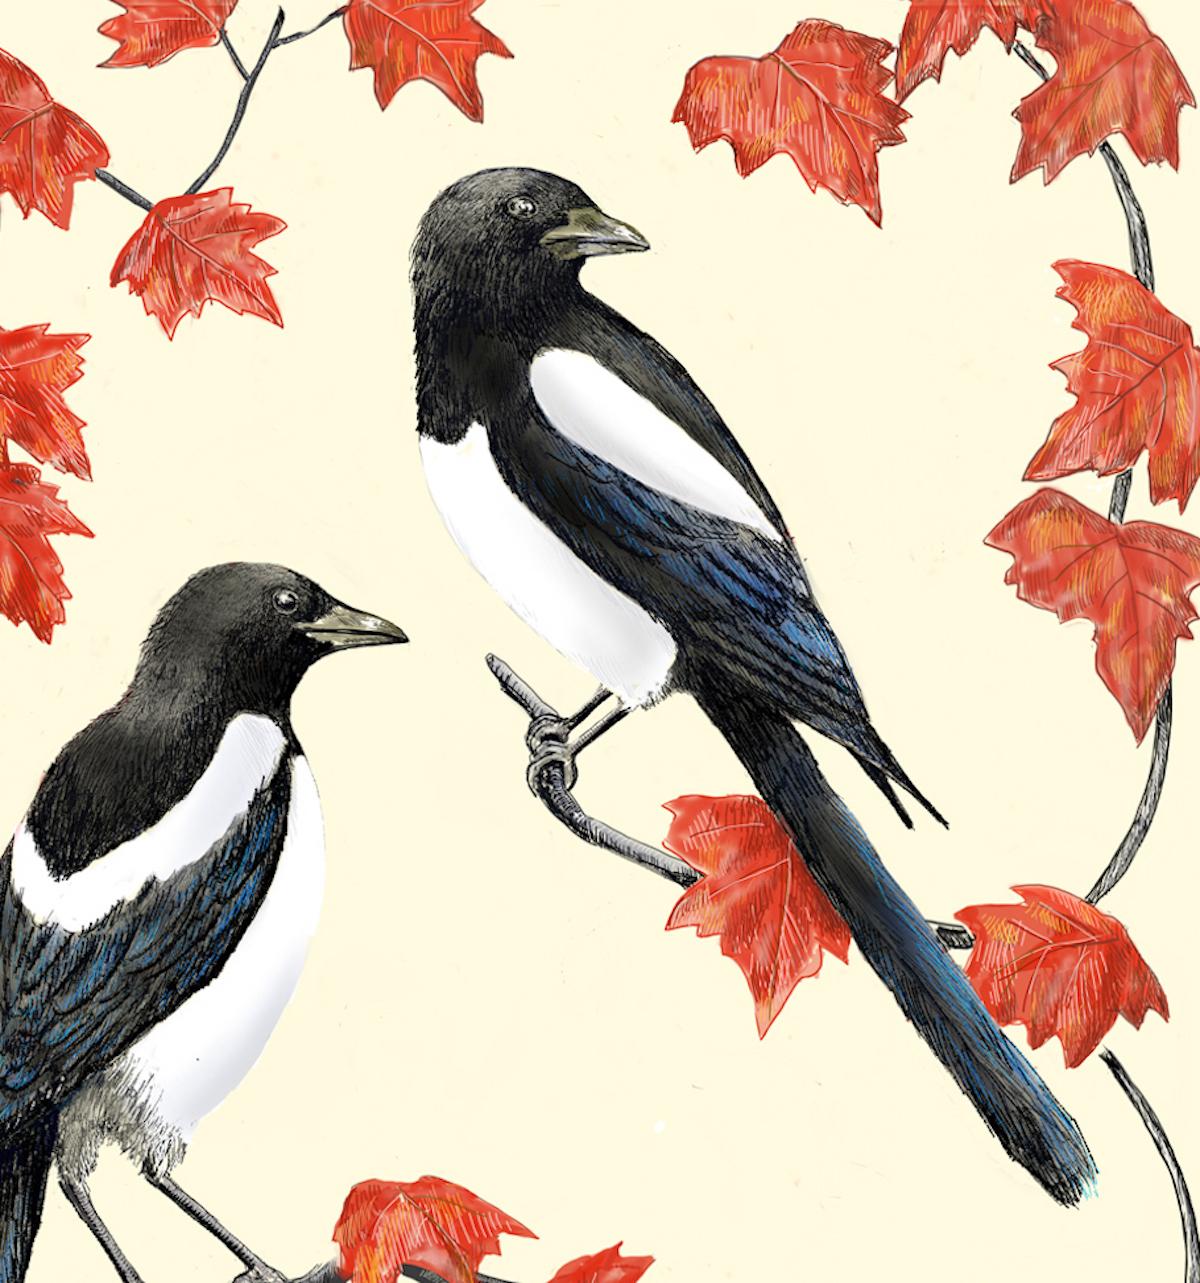 Two More for Joy, Art print, Contemporary, Magpies, Animal art, Birds, Leaf art For Sale 2